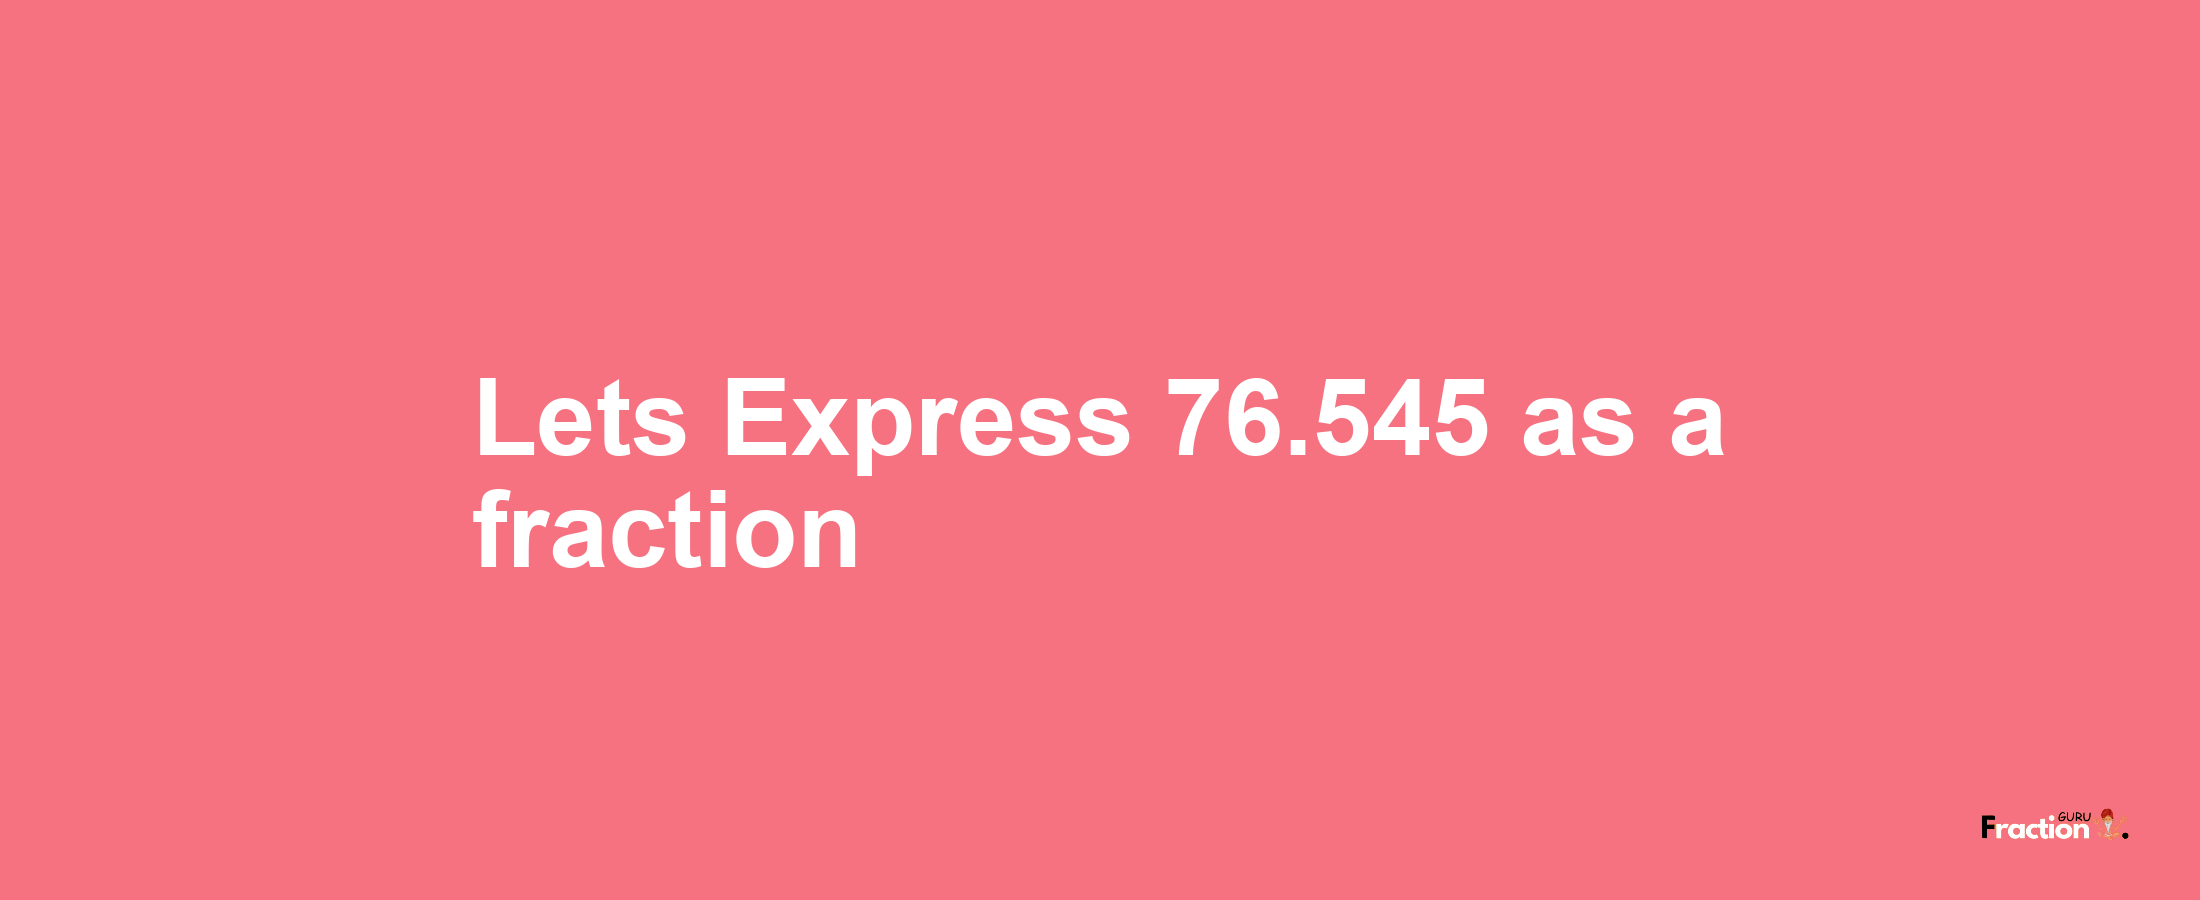 Lets Express 76.545 as afraction